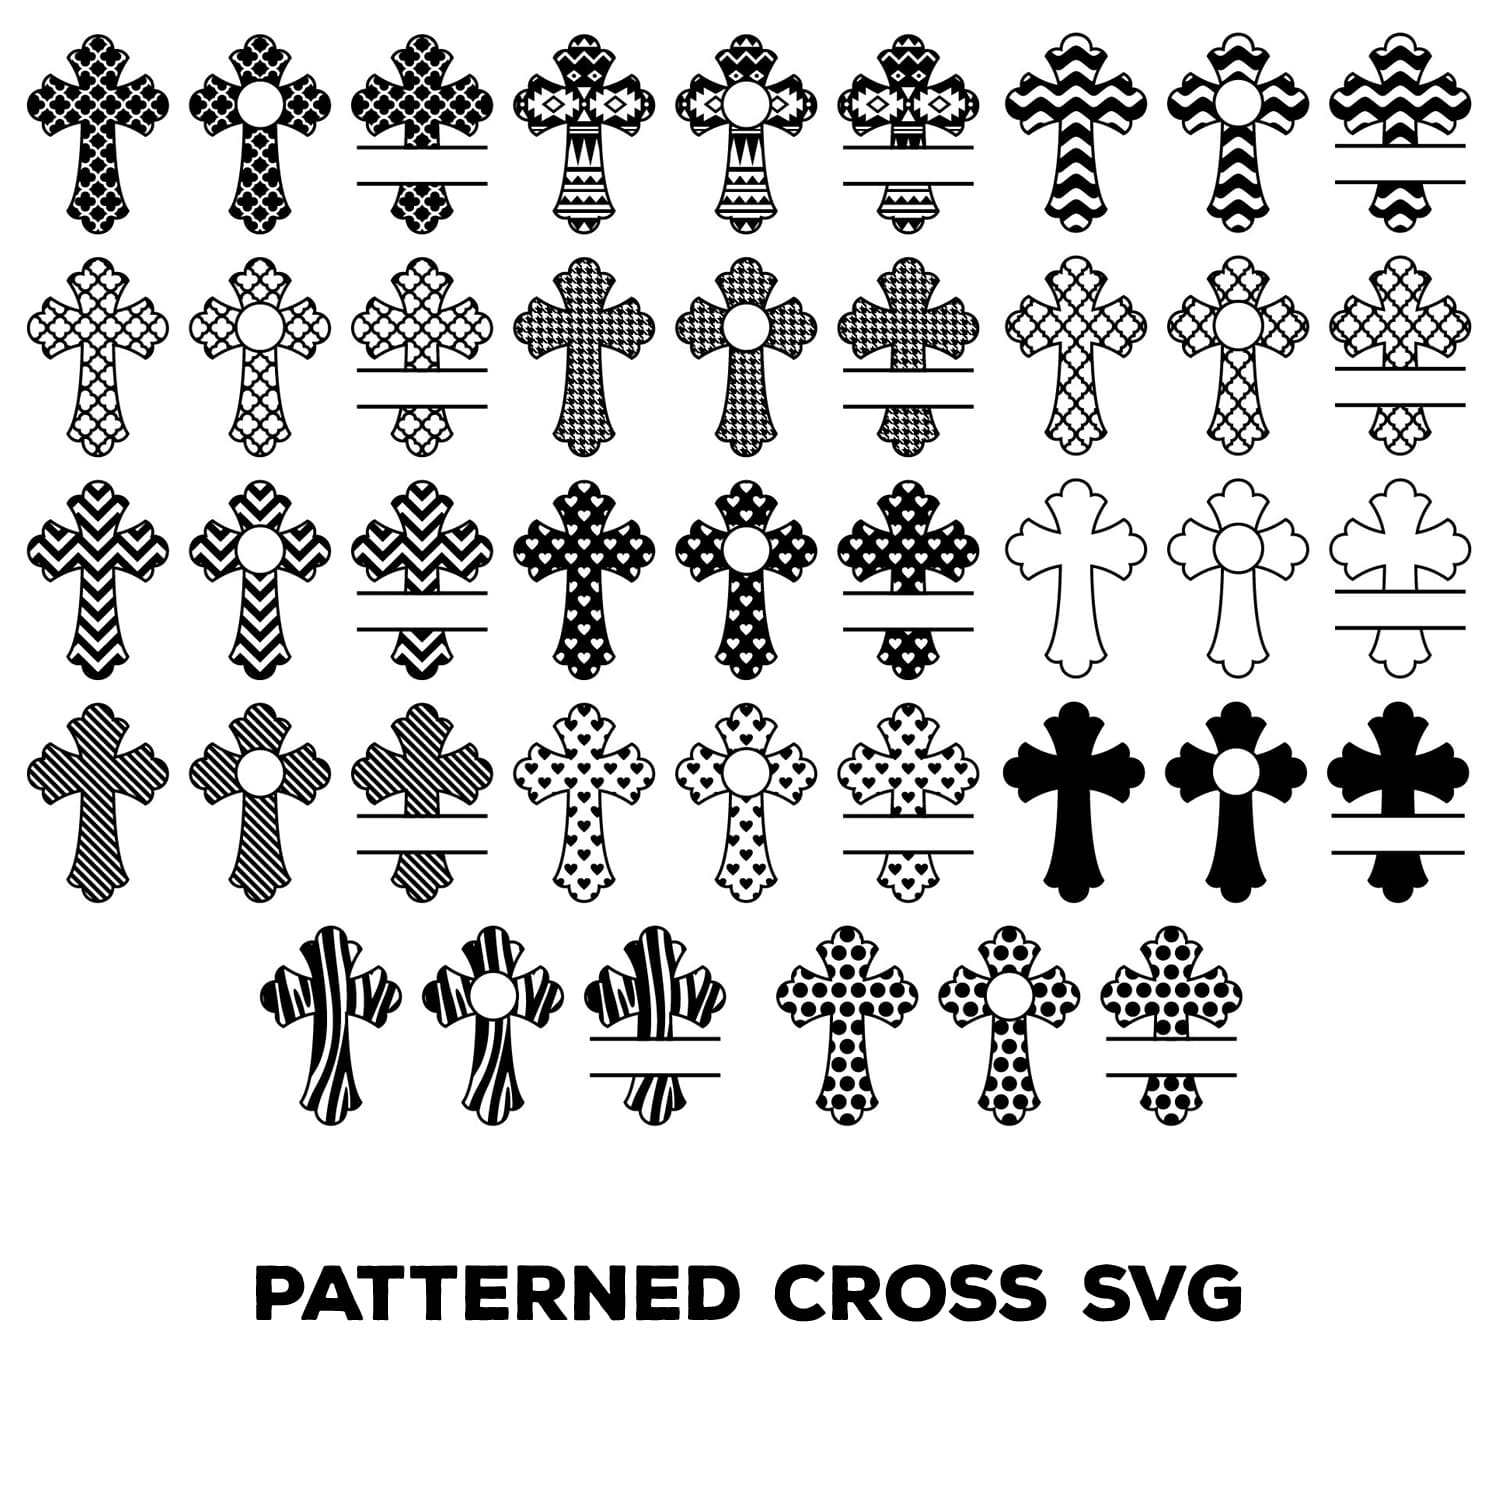 Patterned cross svg - main image preview.